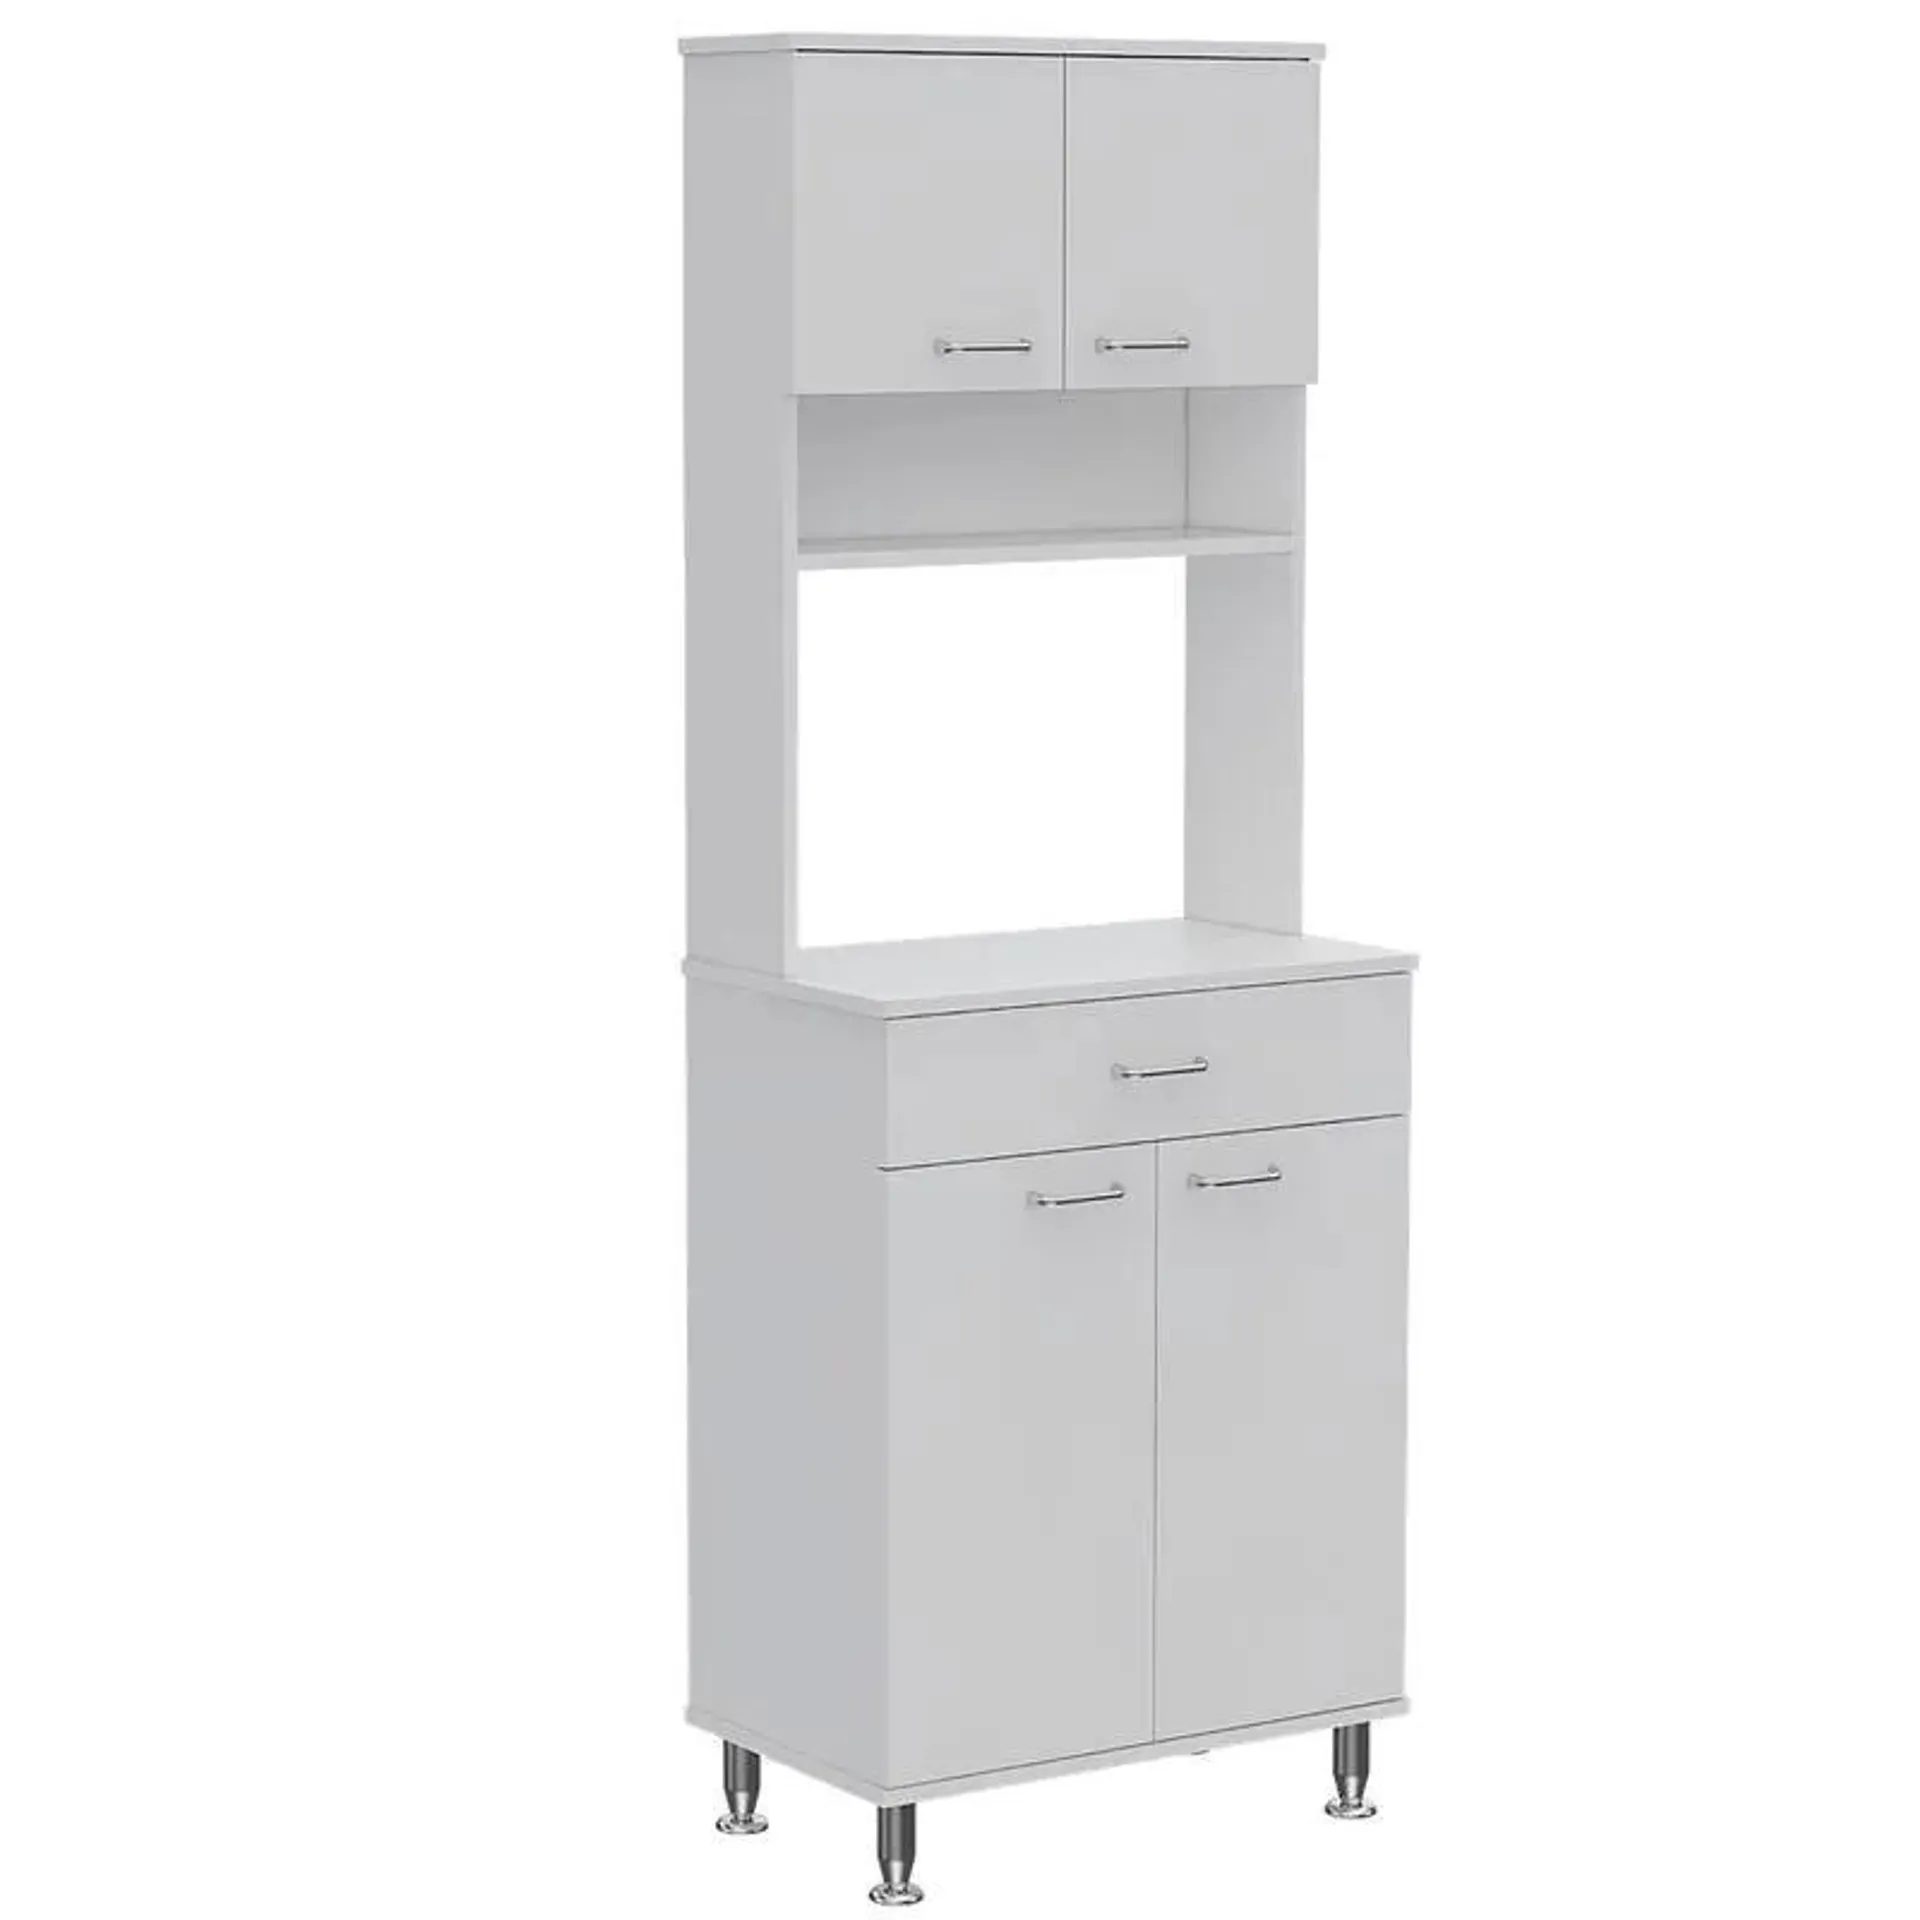 Della 60 Kitchen & Dining room Pantry with Countertop, Closed & Open Storage -Light Oak